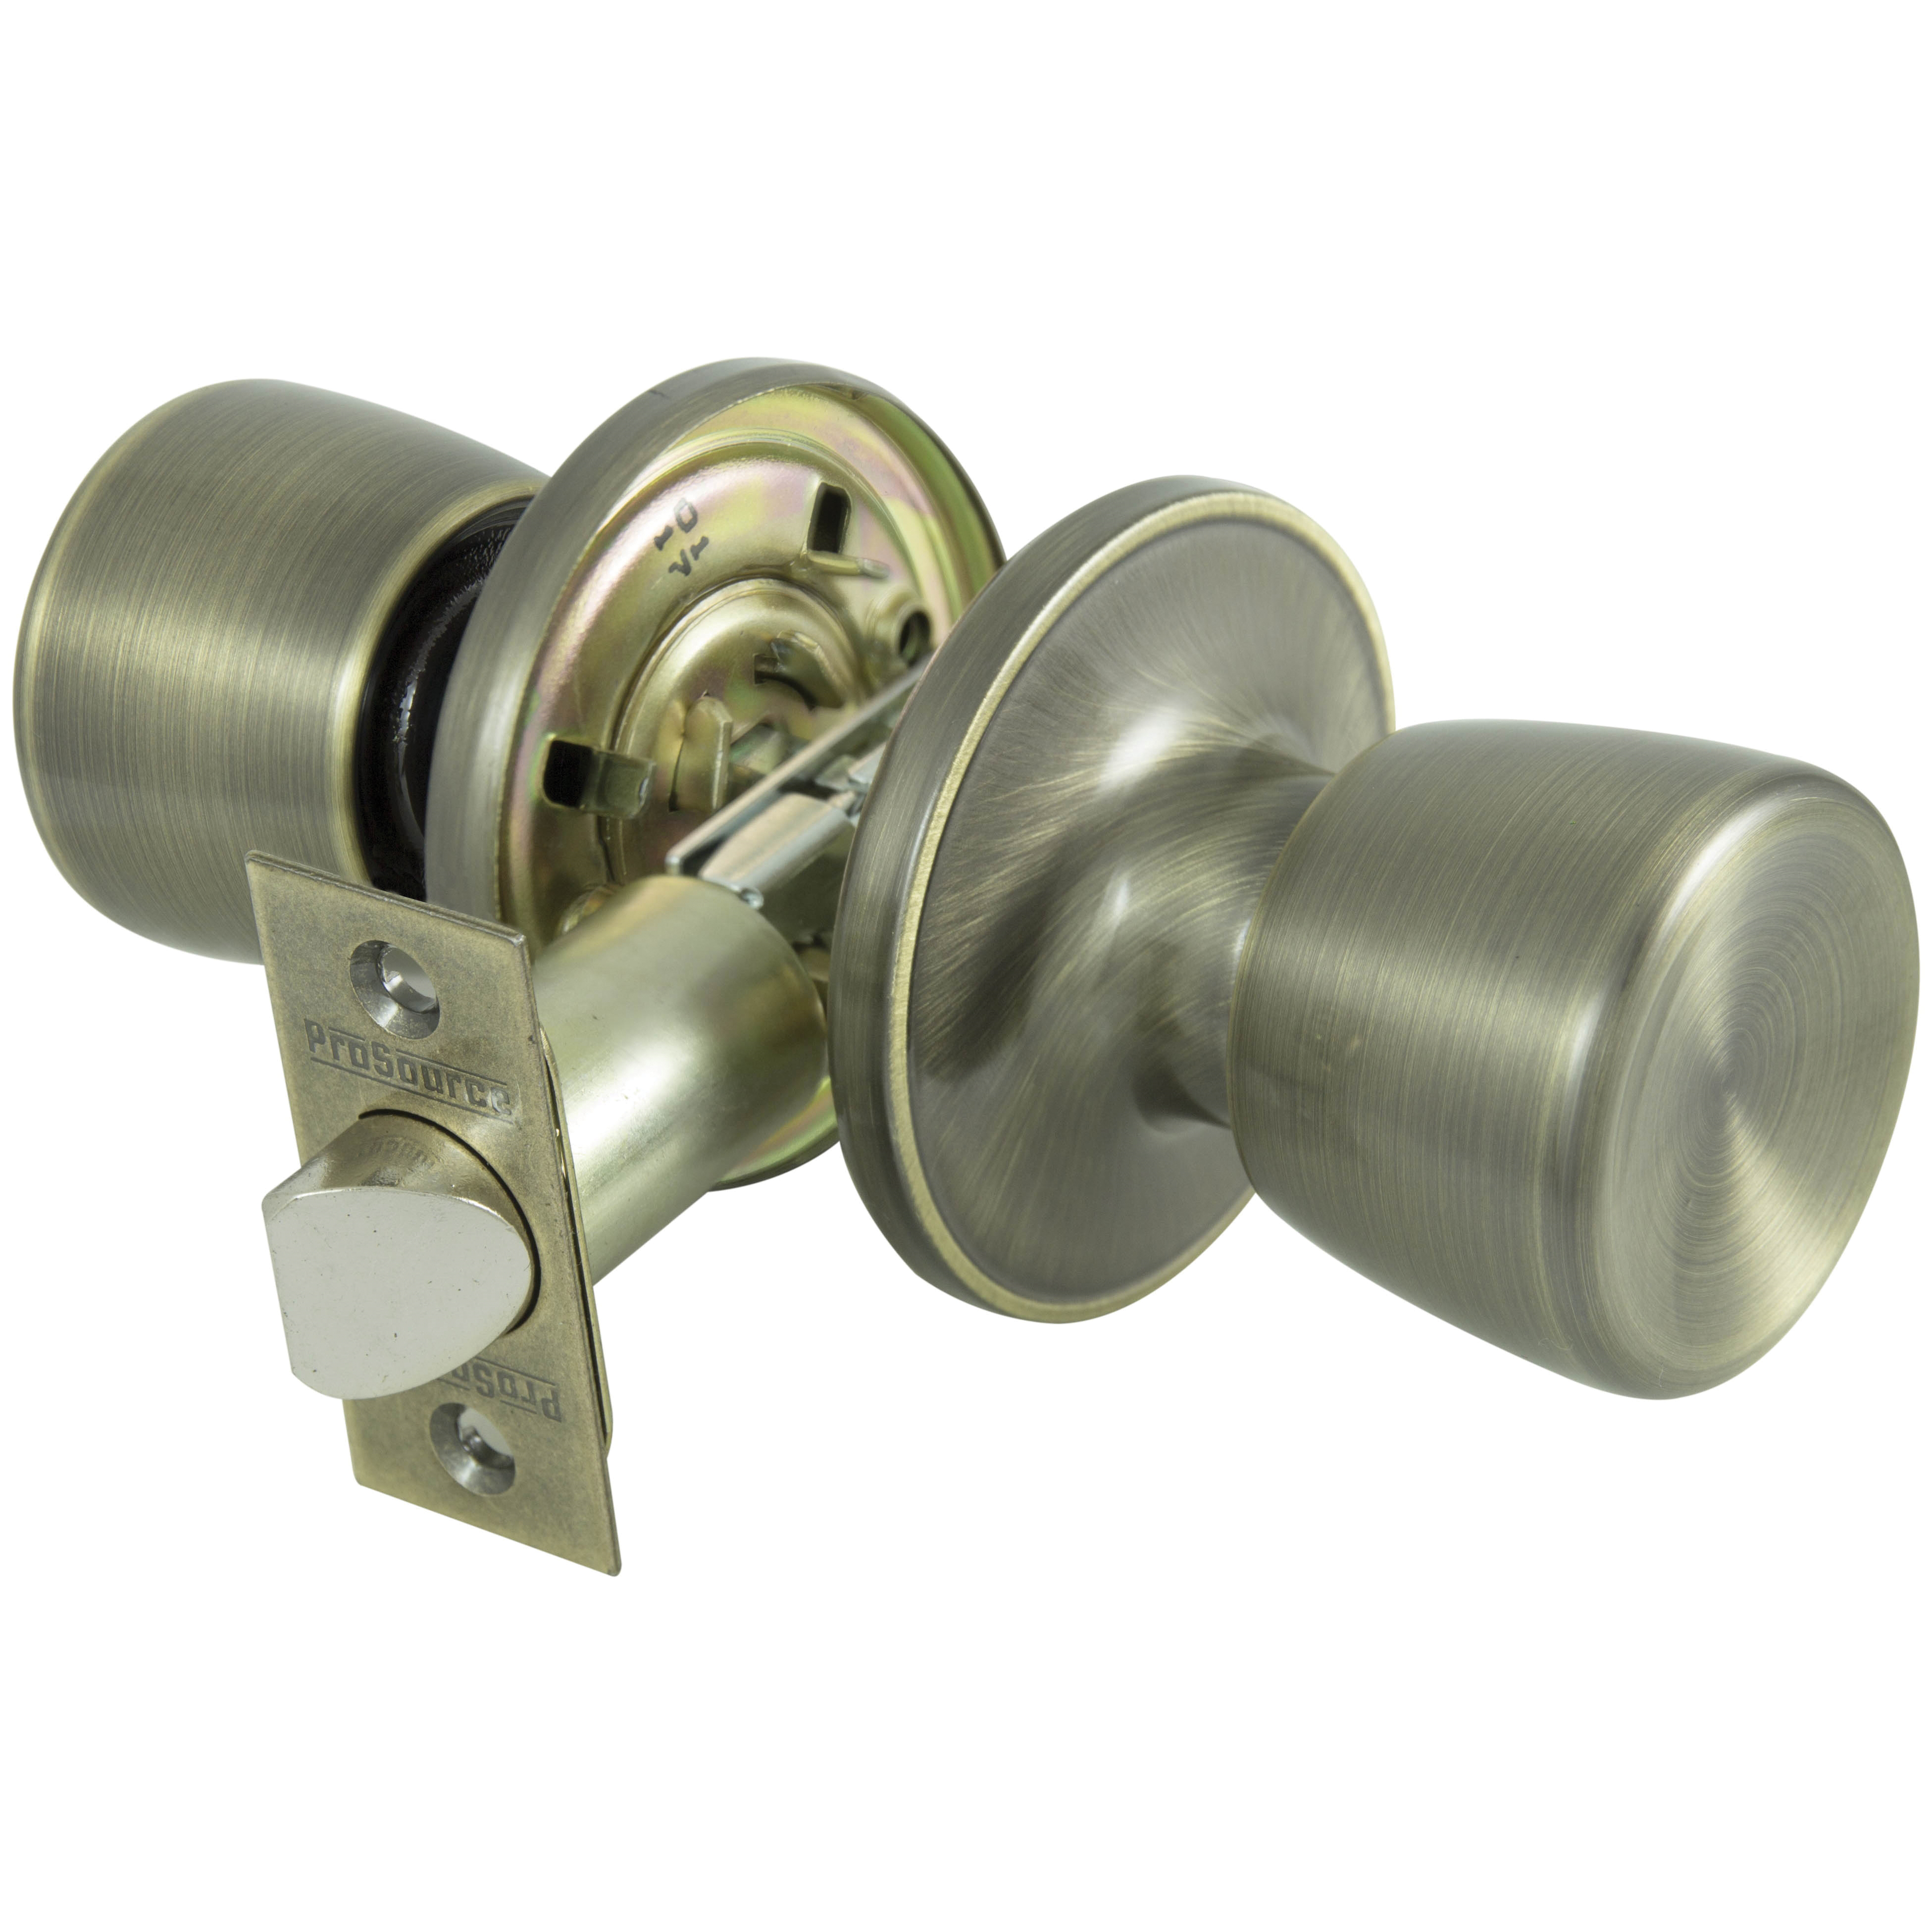 TS830V-PS Passage Knob, Metal, Antique Brass, 2-3/8 to 2-3/4 in Backset, 1-3/8 to 1-3/4 in Thick Door